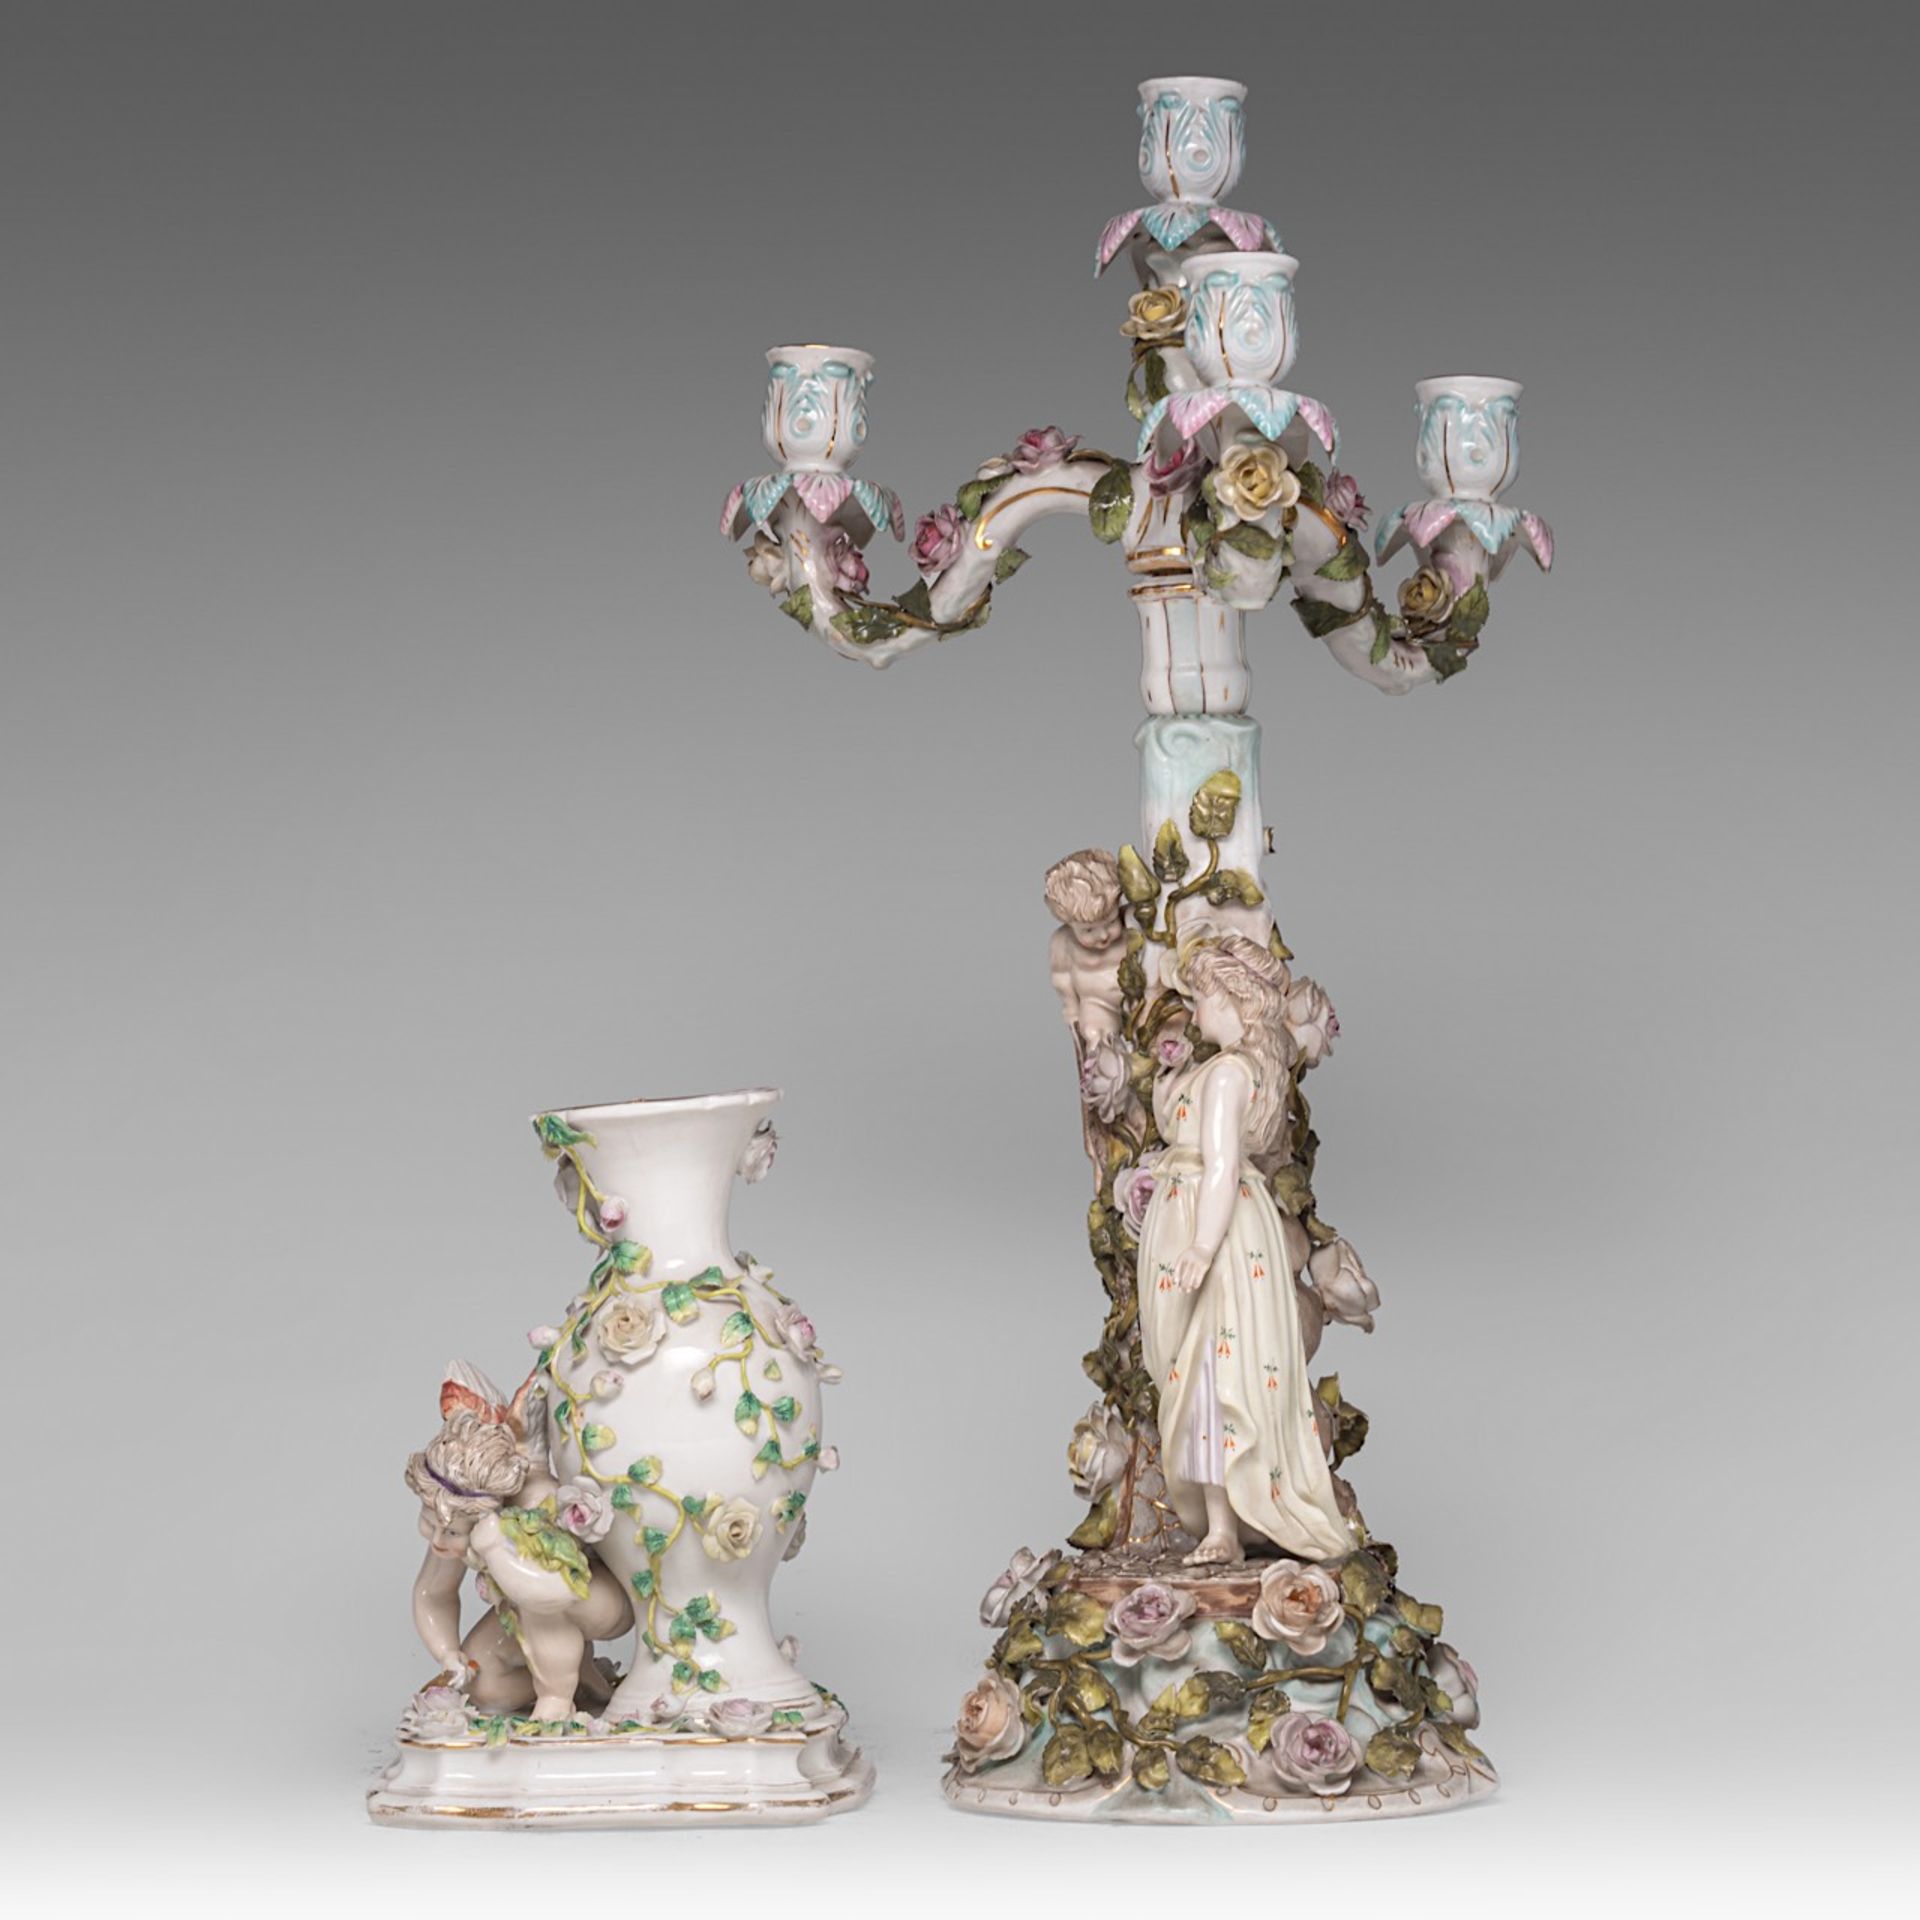 A collection of polychrome decorated Saxon porcelain figurines and a candelabra, H 51,5 cm (tallest) - Bild 3 aus 13